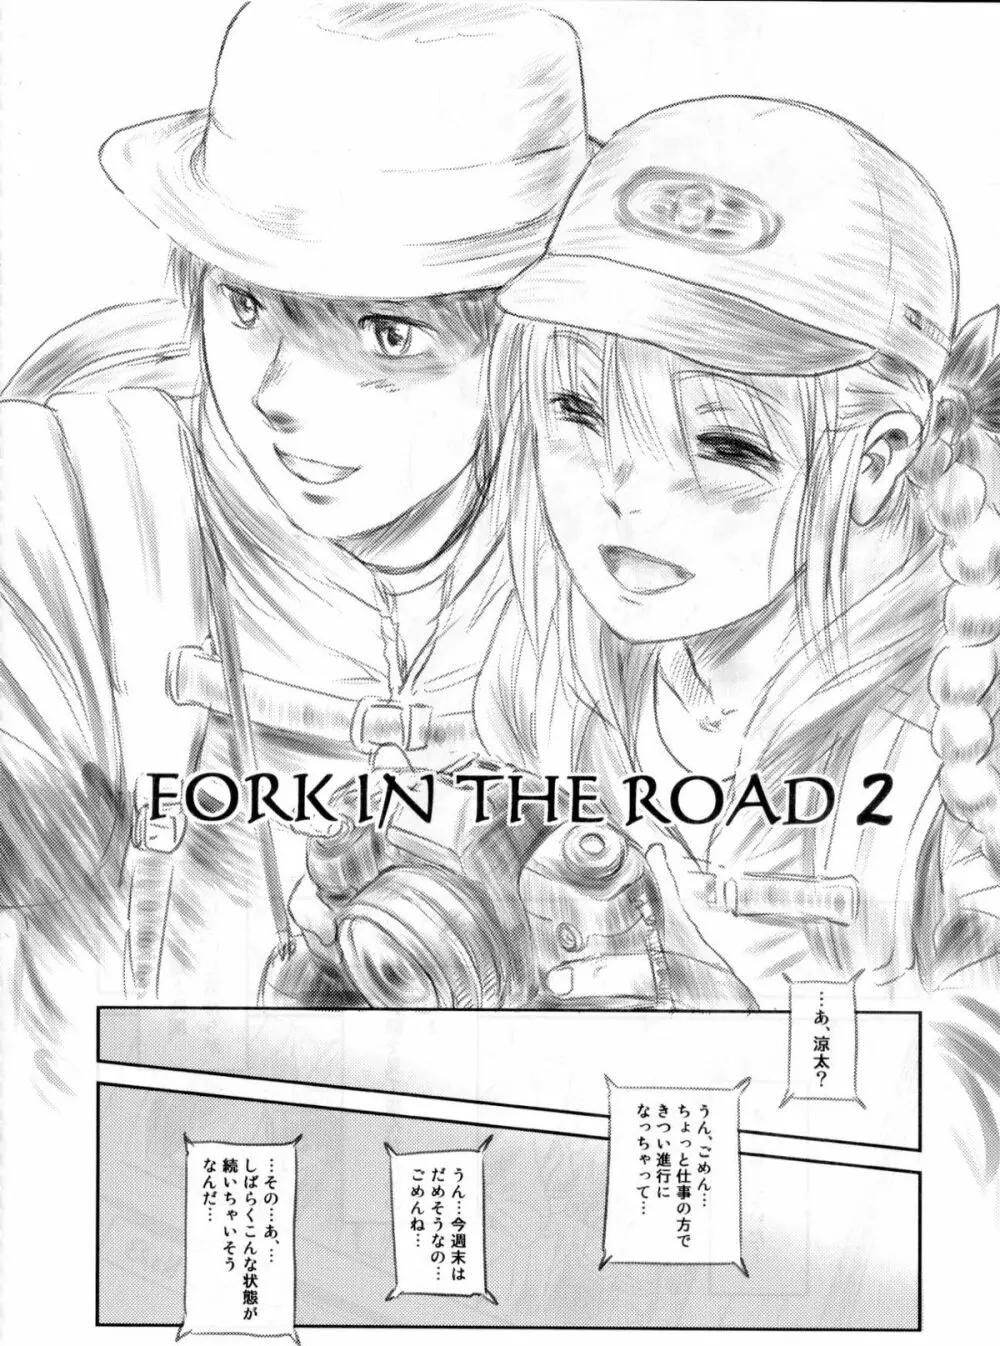 FORK IN THE ROAD 2 9ページ